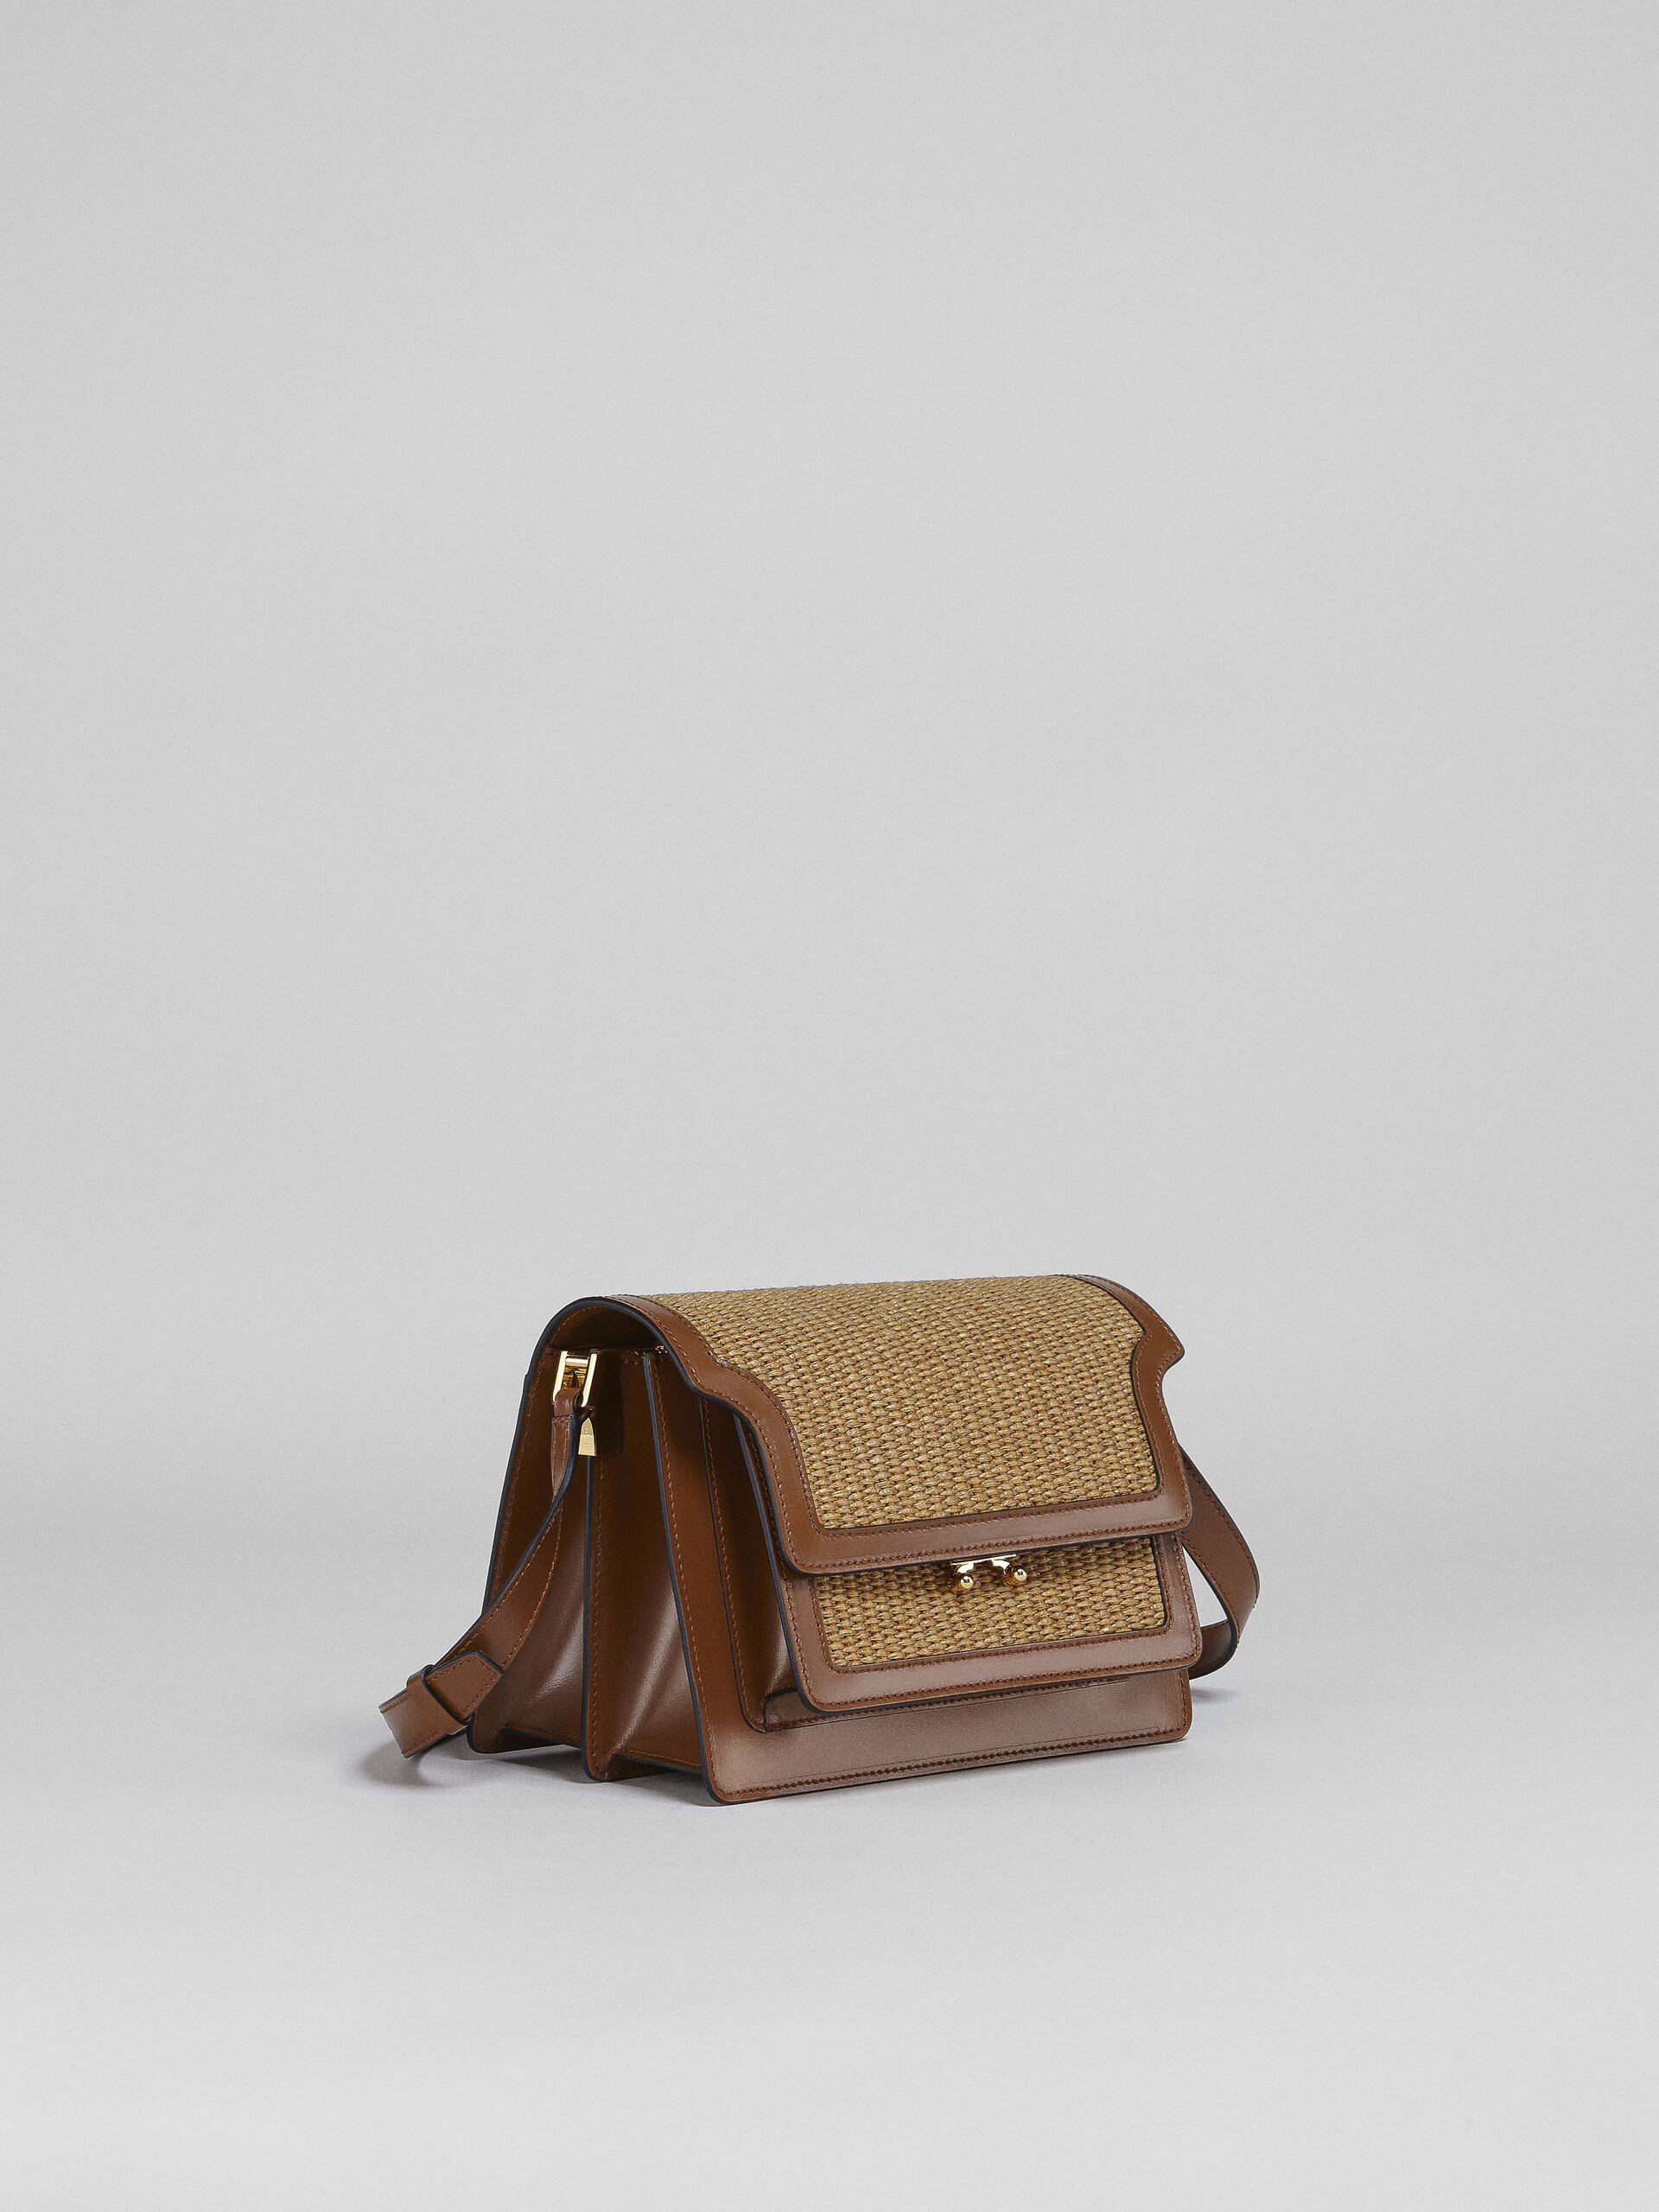 TRUNK SOFT medium bag in brown leather and raffia - Shoulder Bags - Image 6